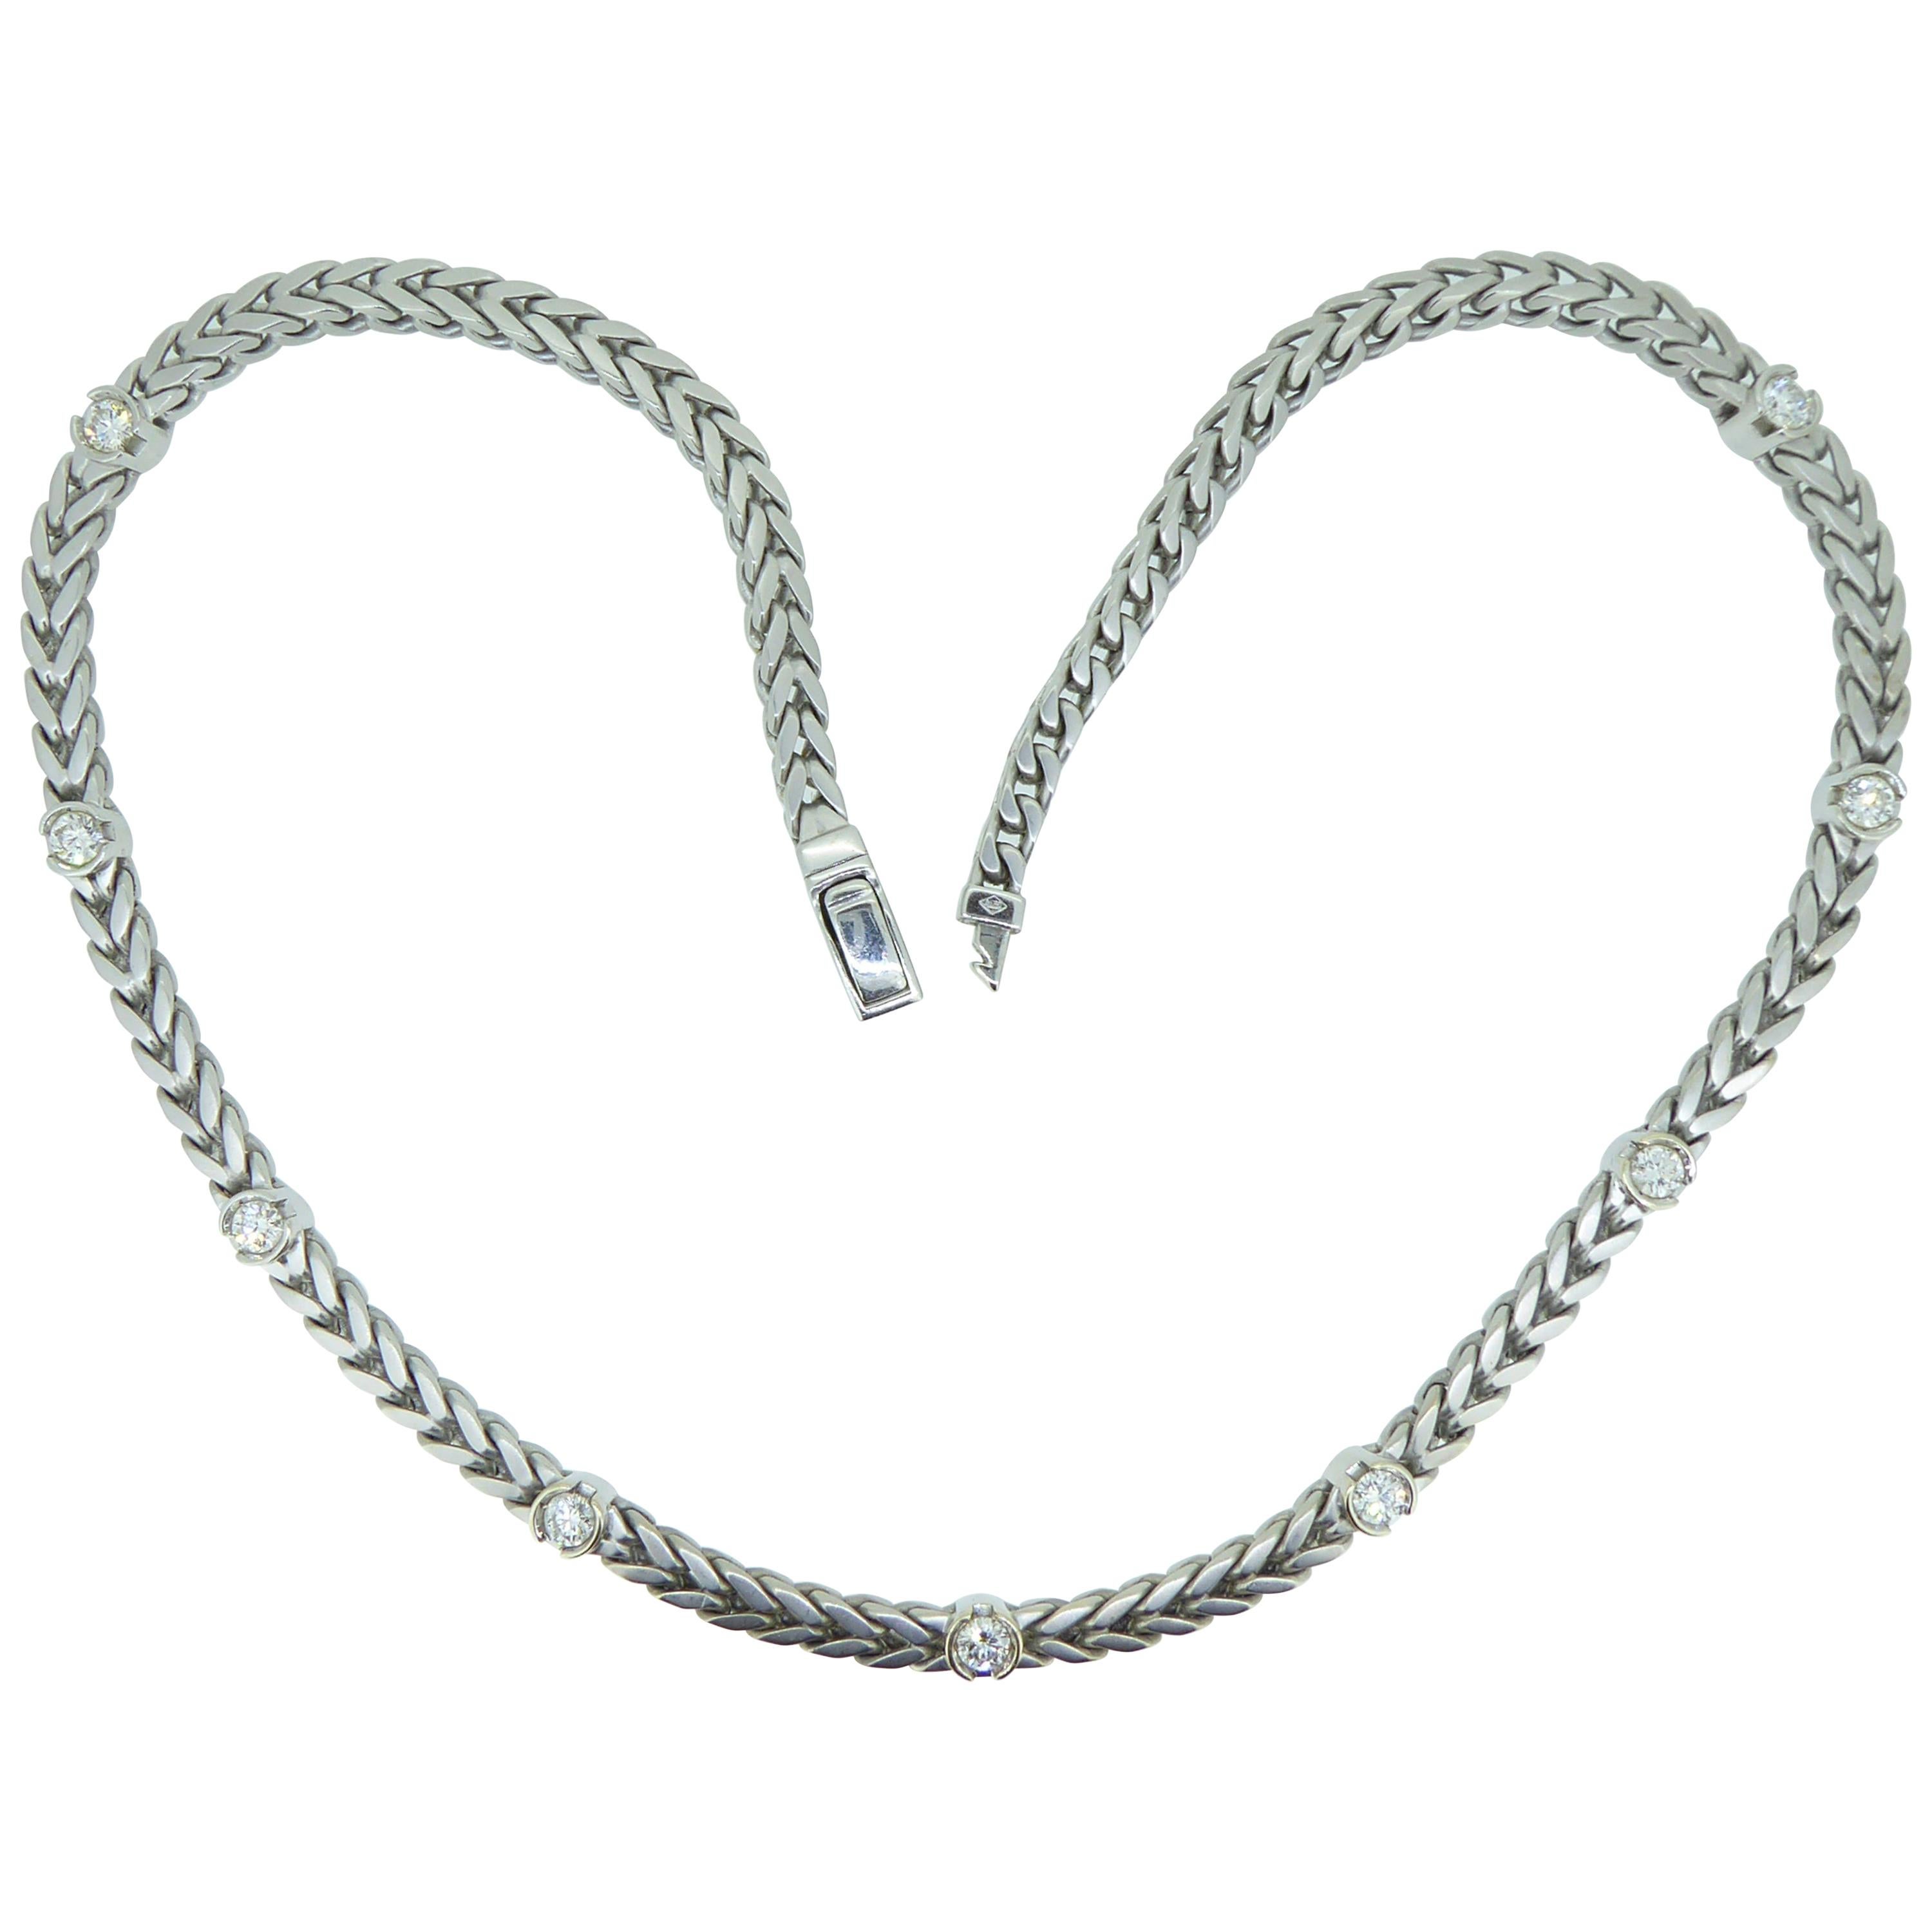 2.25 Carat Diamond Collar Necklace, White Gold Franco Link Chain, Pre-Owned